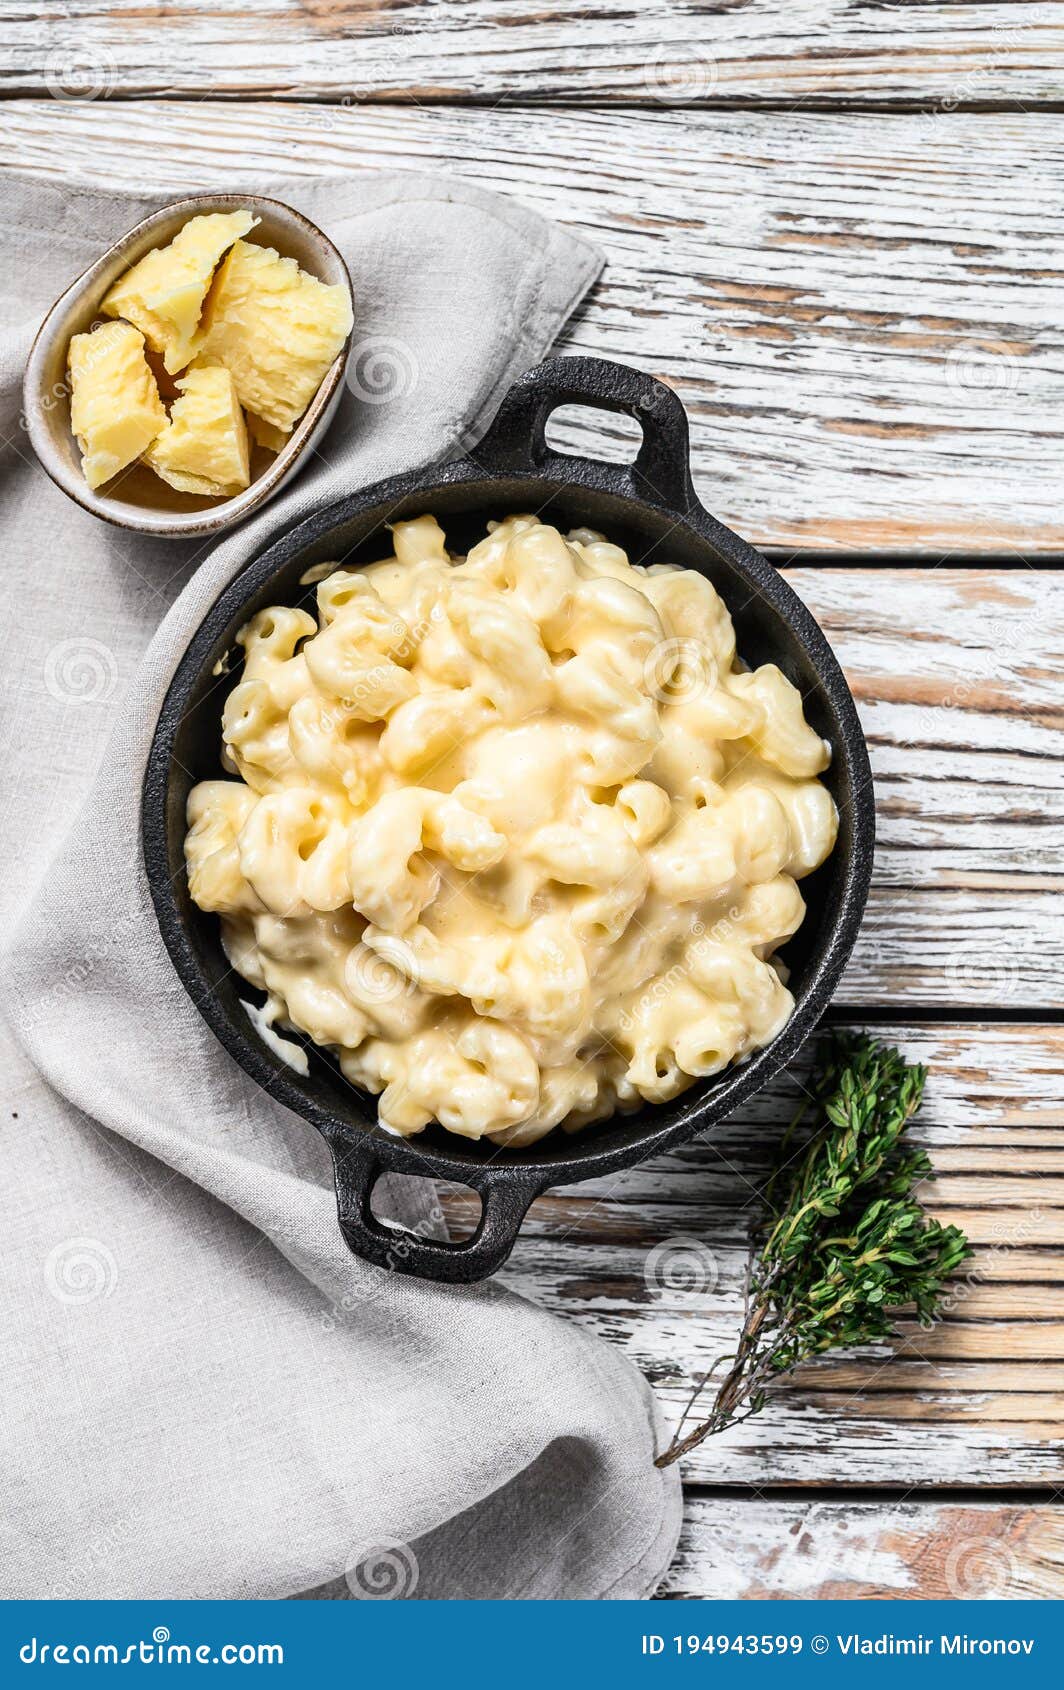 american mac and cheese, macaroni pasta in cheesy sauce. white wooden background. top view